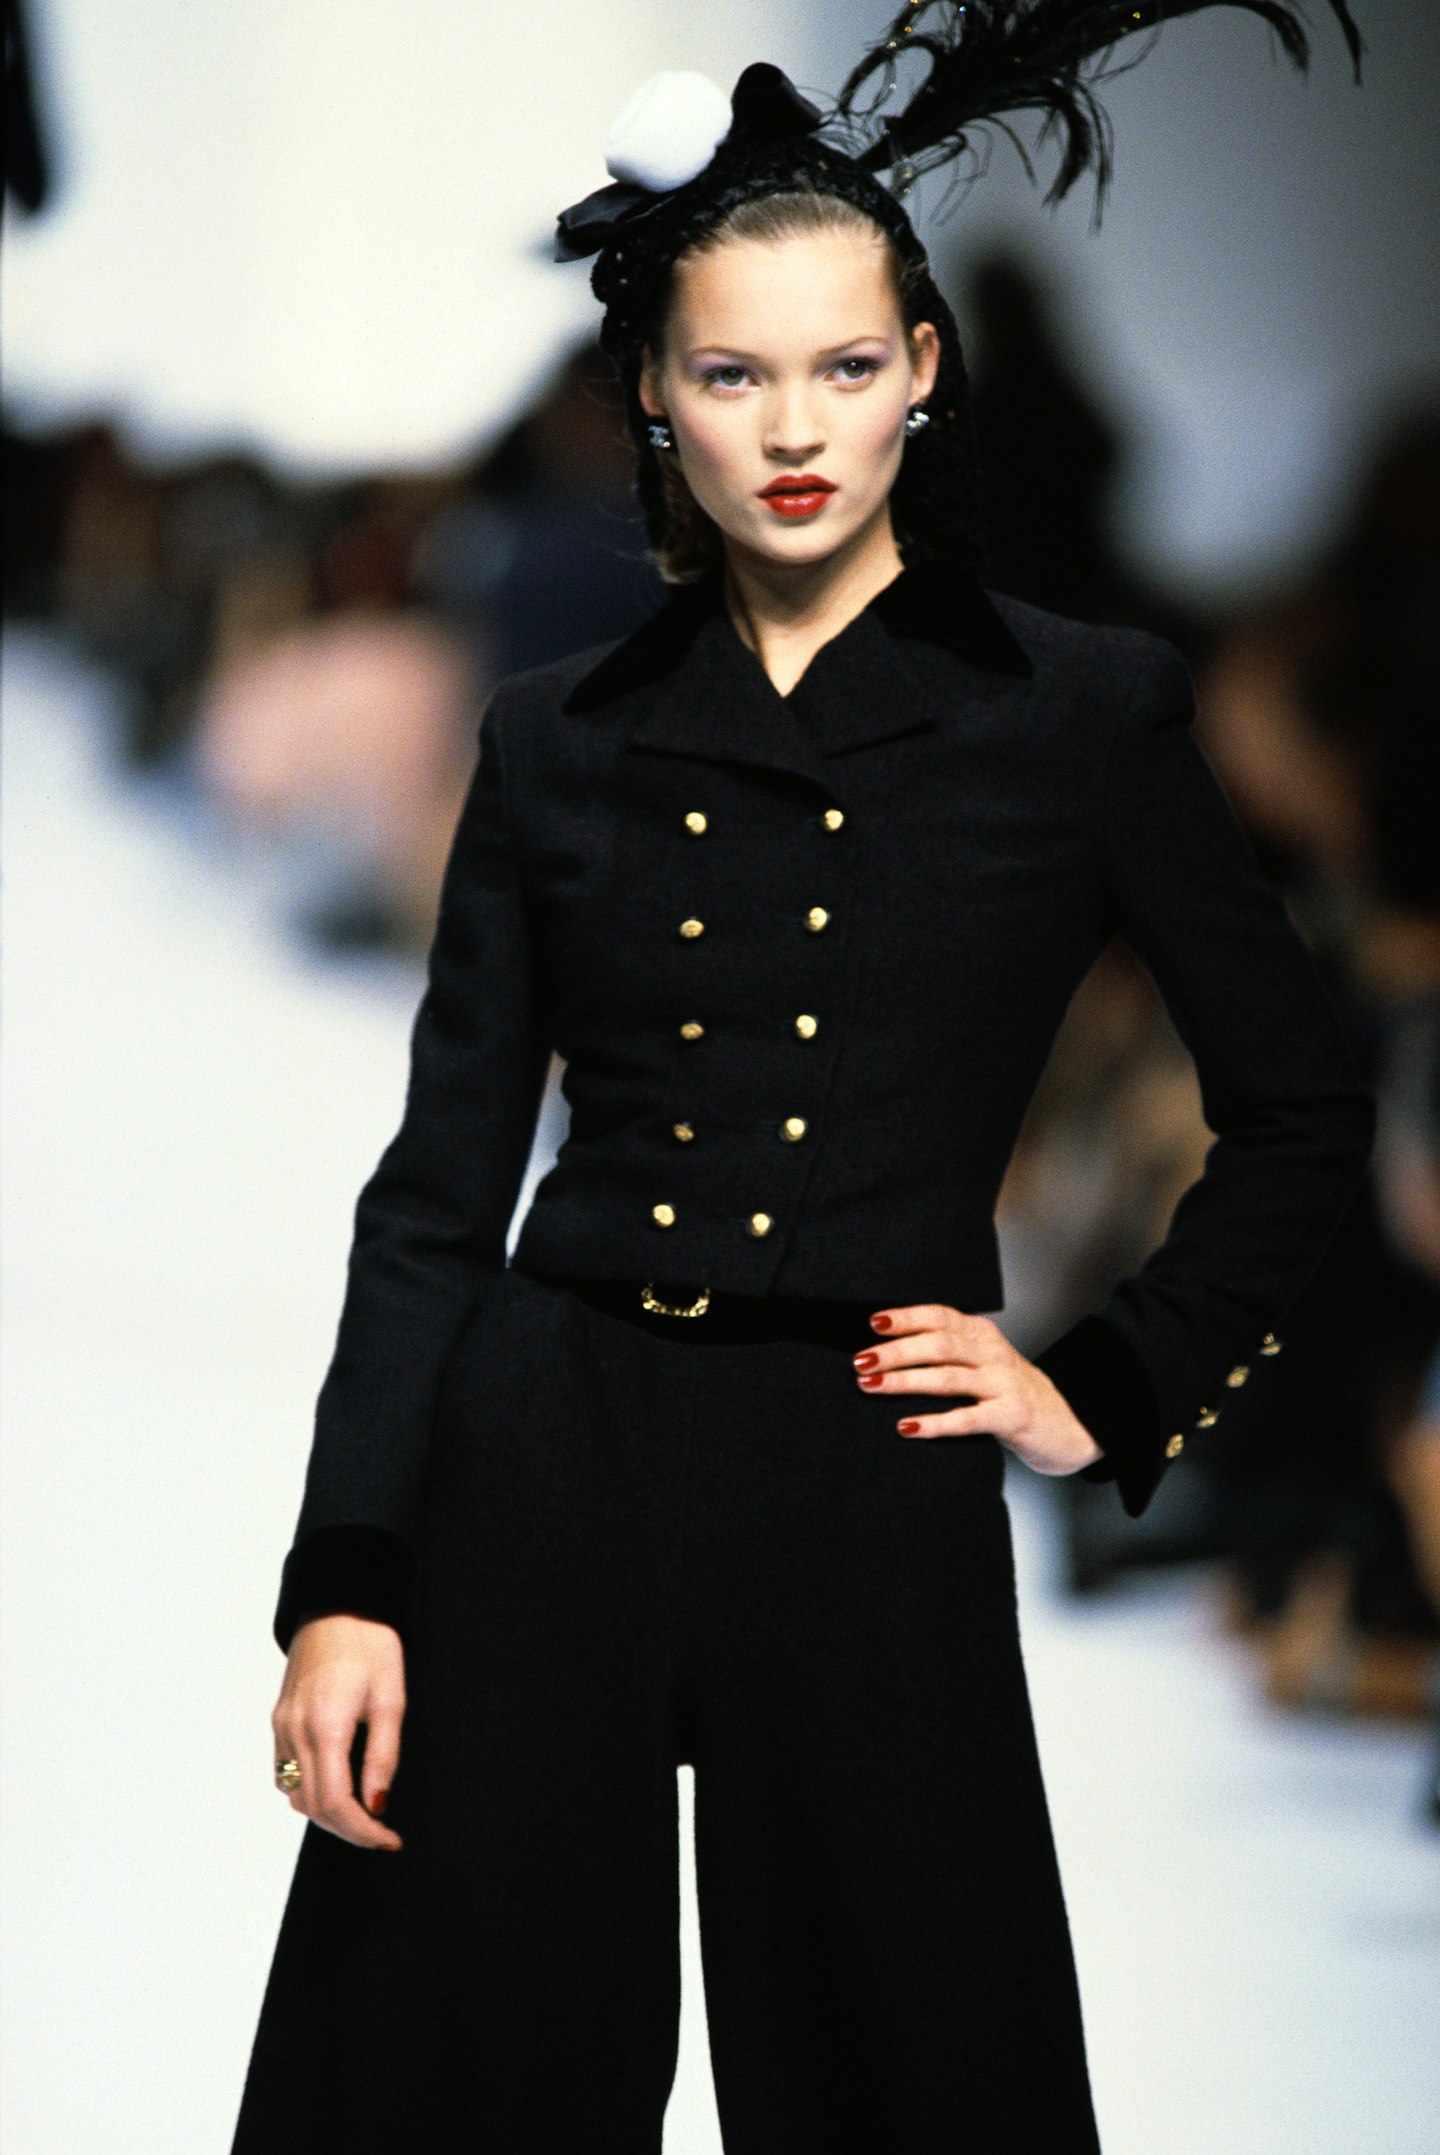 Chanel exhibition catwalk moments Kate Moss Walks For Chanel In 1990